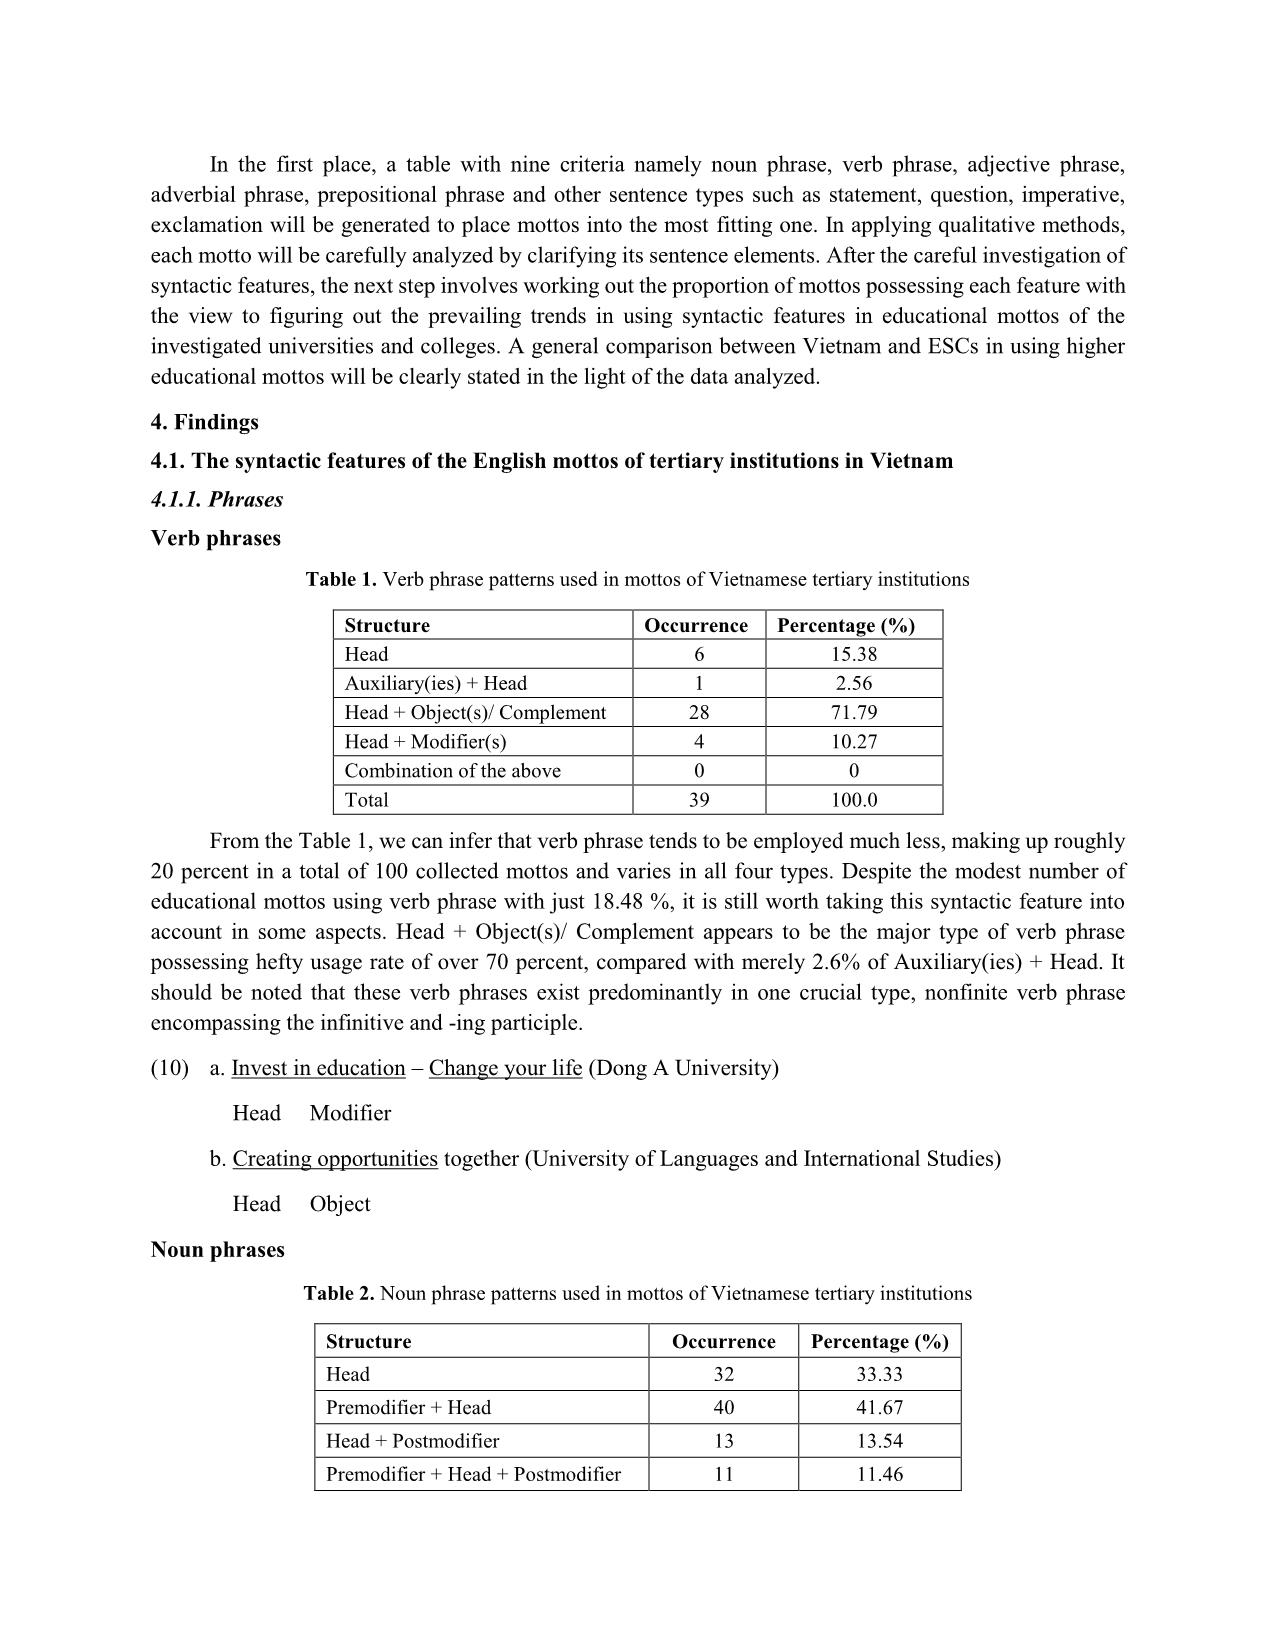 Educational mottos of tertiary institutions in Vietnam and English-Speaking countries: A study of syntactic features trang 5